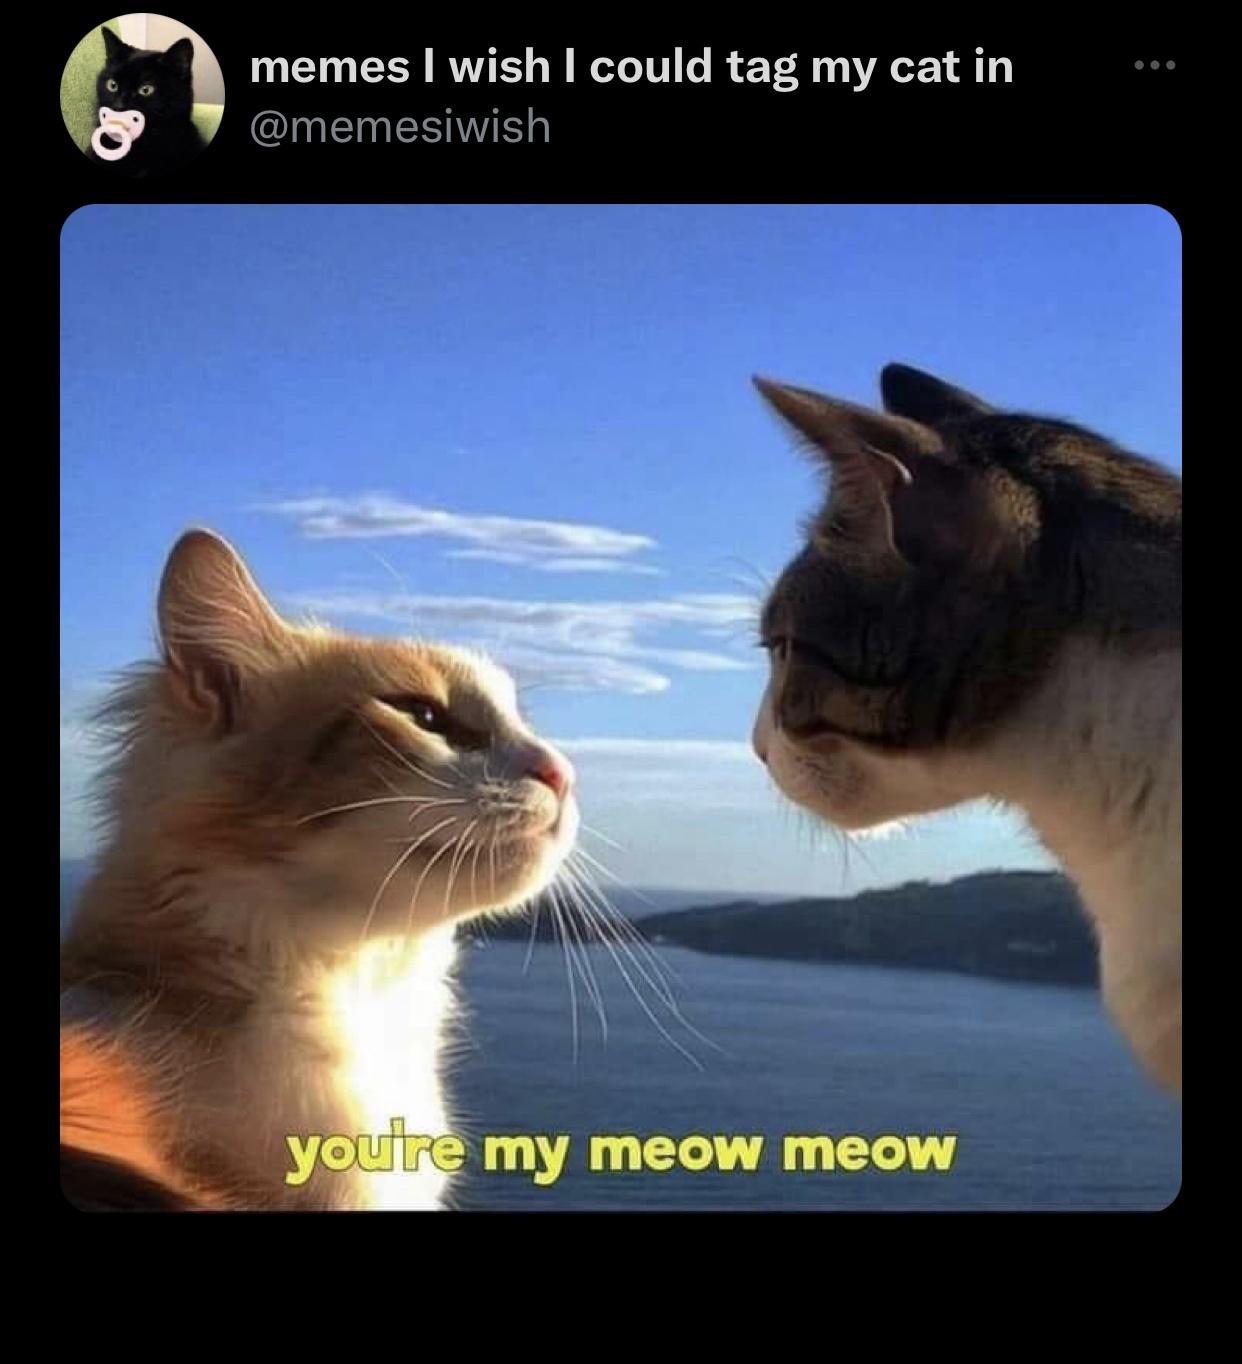 funny tweets - youre my meow meow - memes I wish I could tag my cat in youre my meow meow